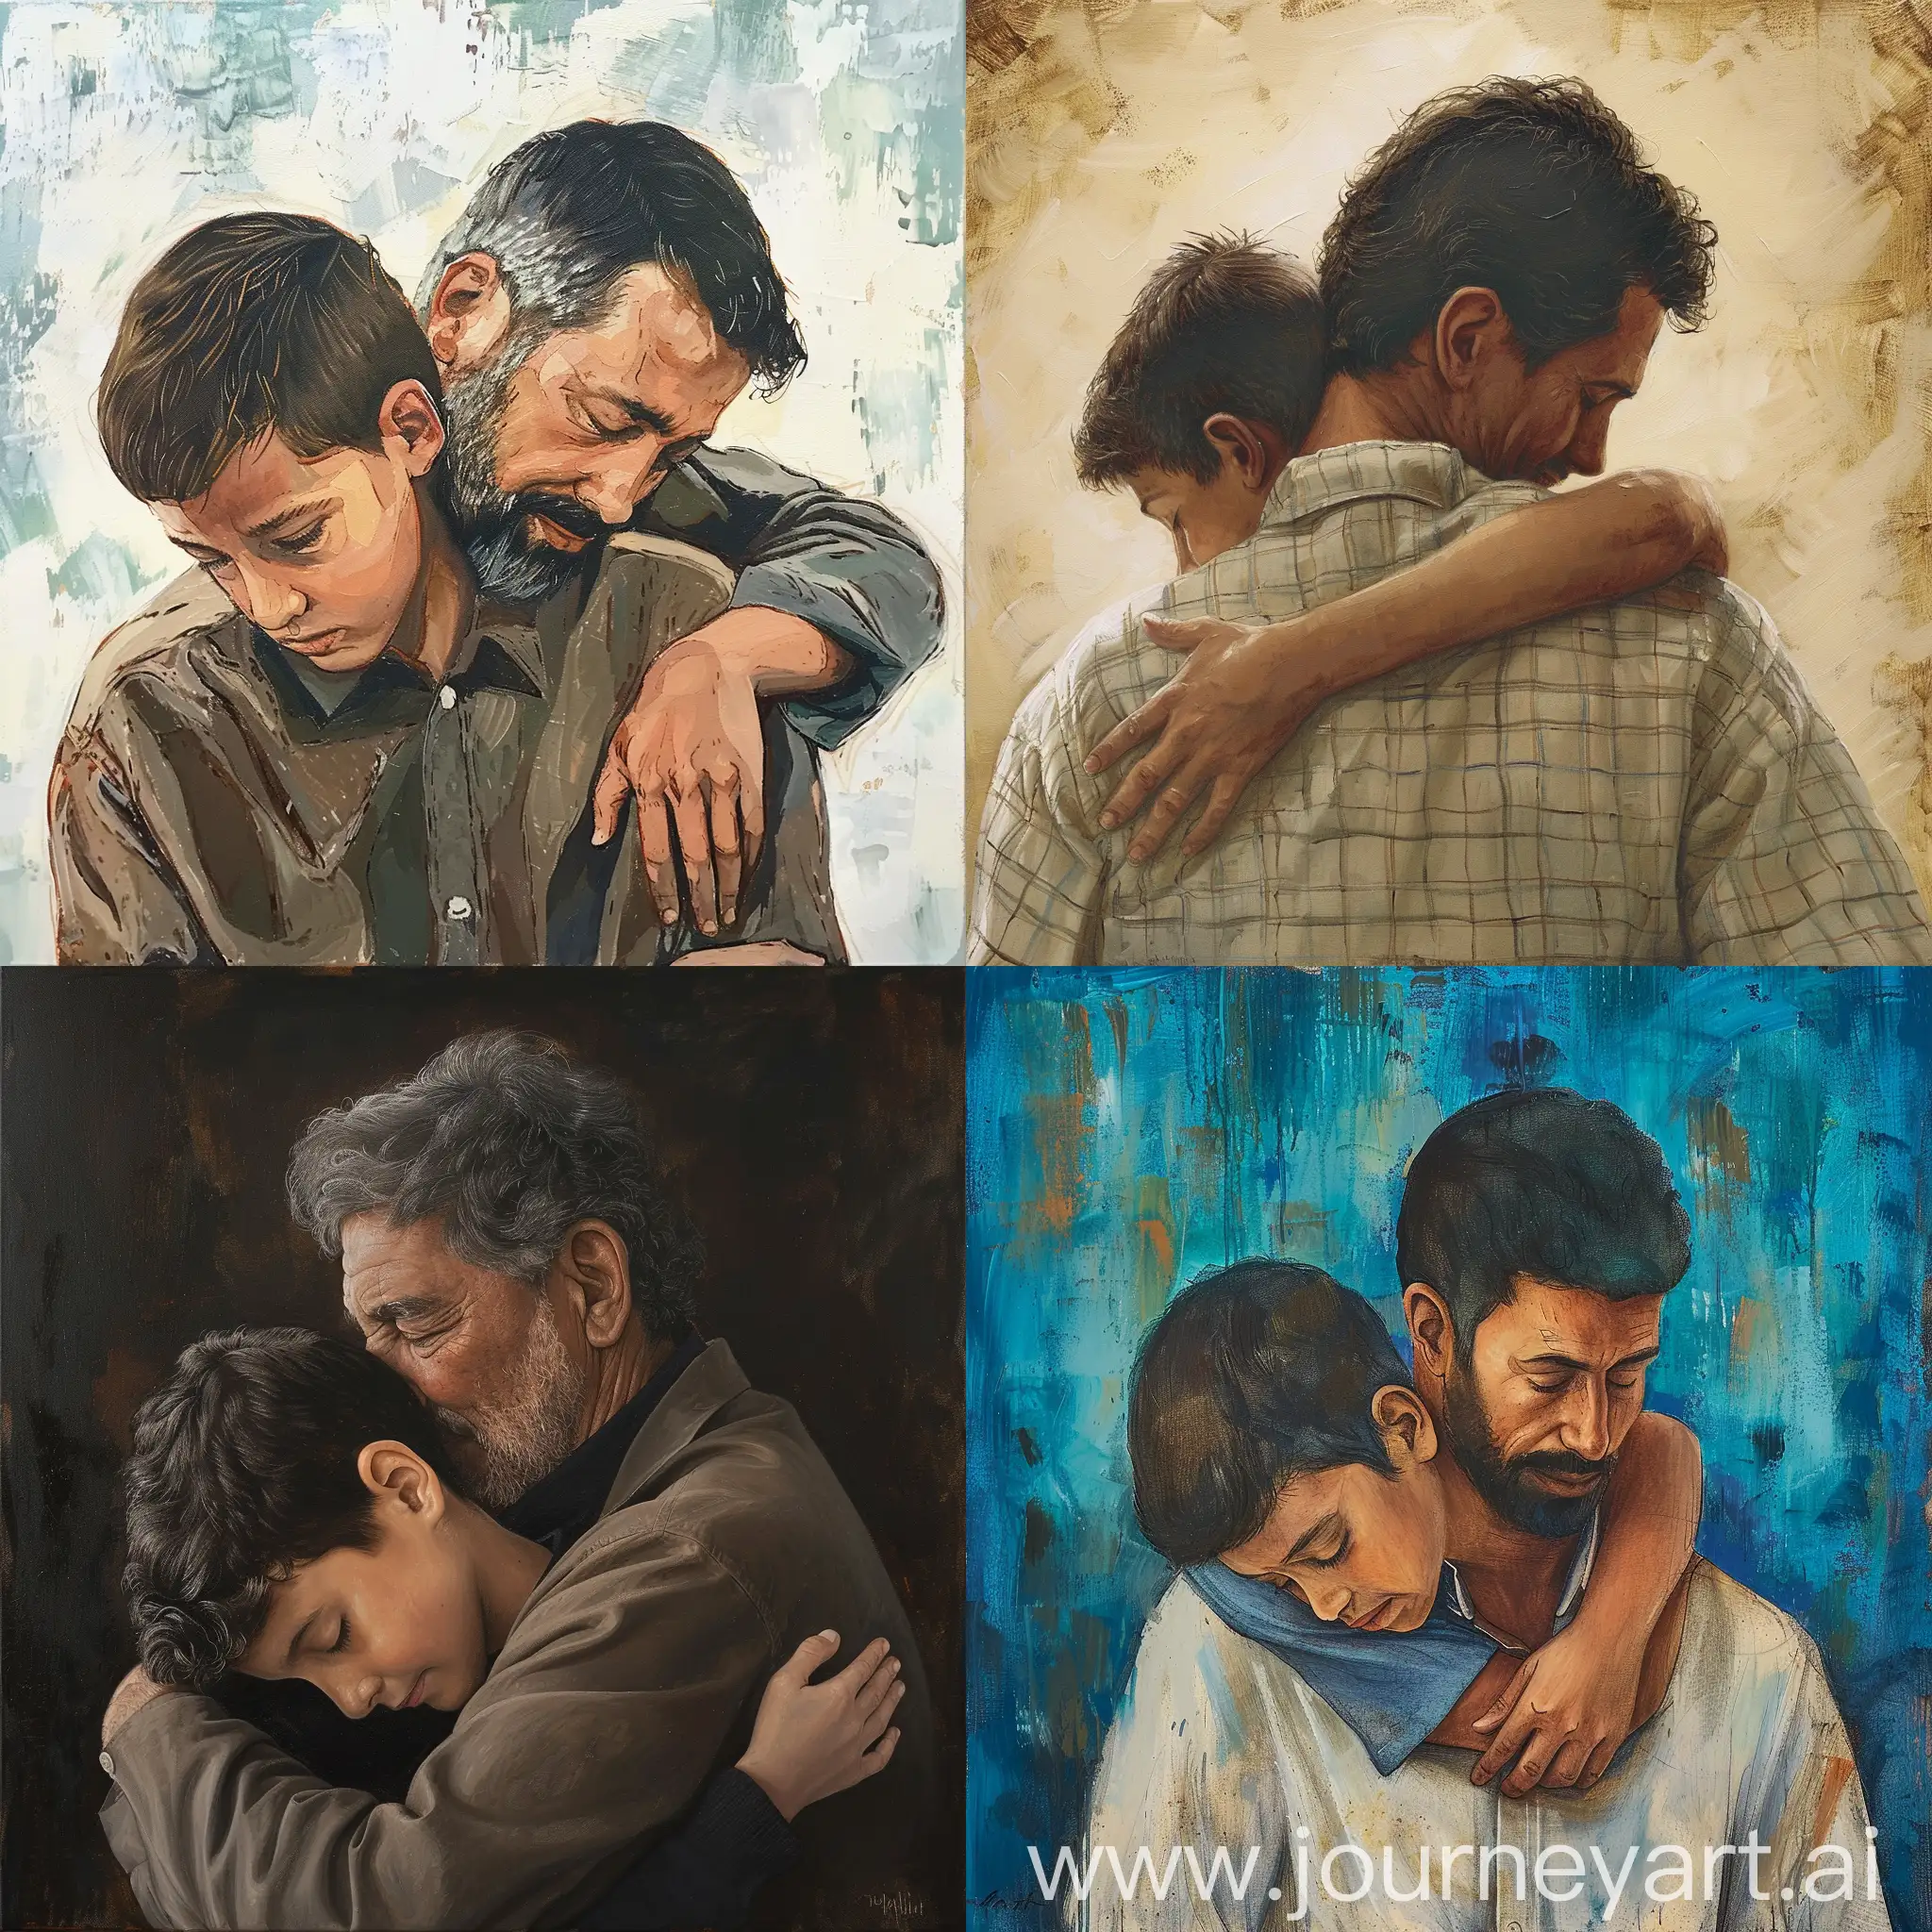 Artwork of father and son embracing with son’s head on father’s shoulder